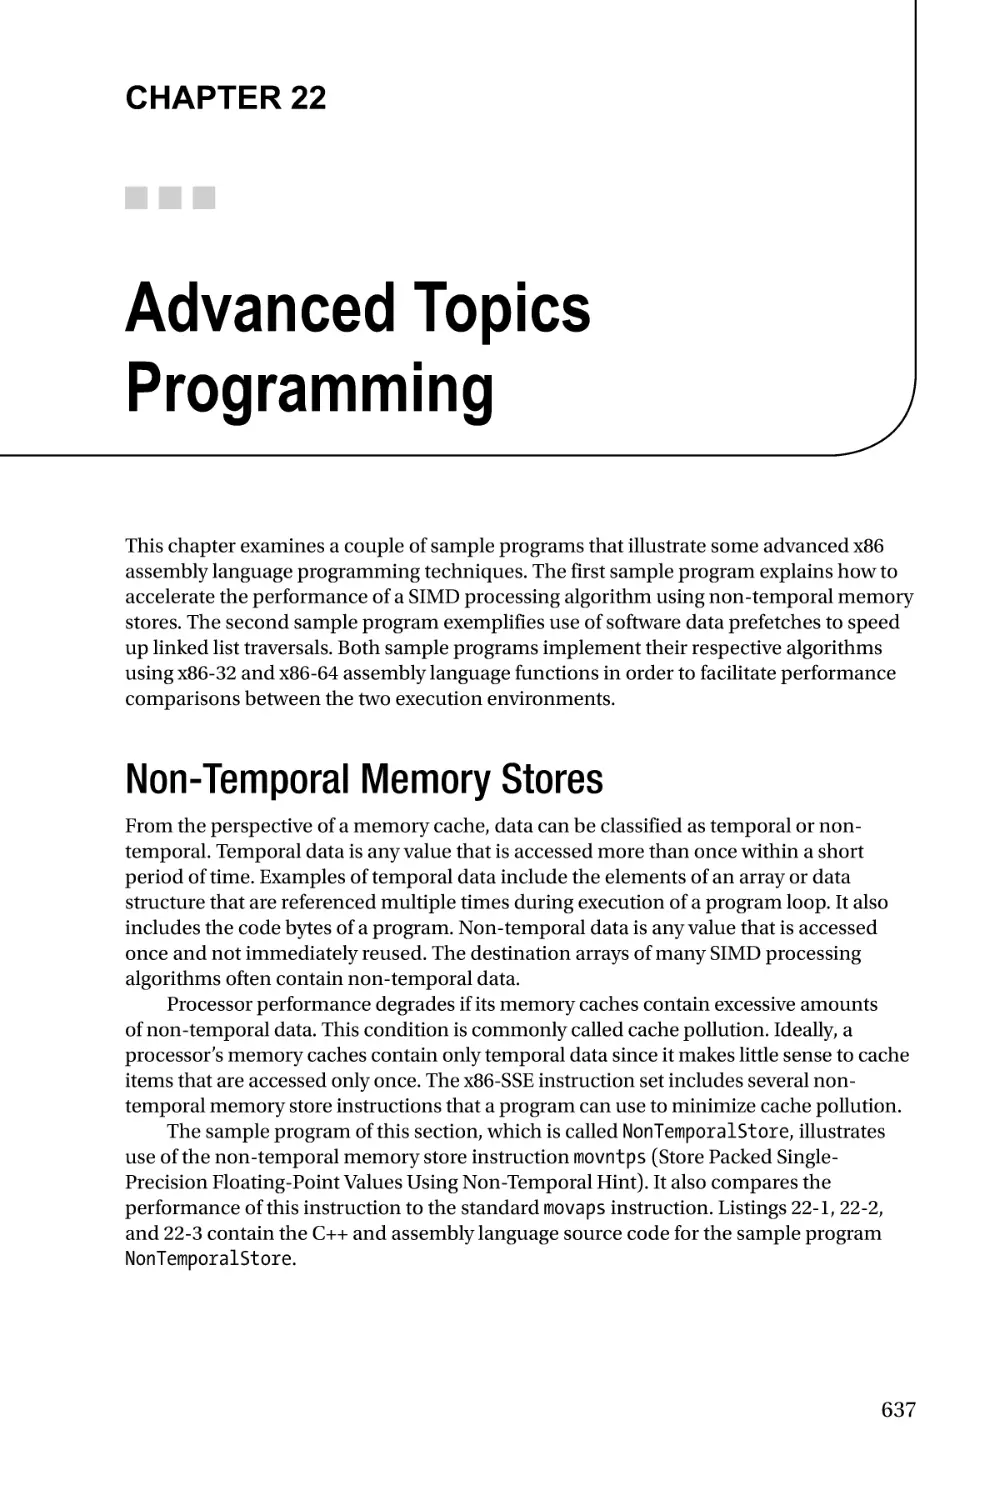 Chapter 22
Non-Temporal Memory Stores